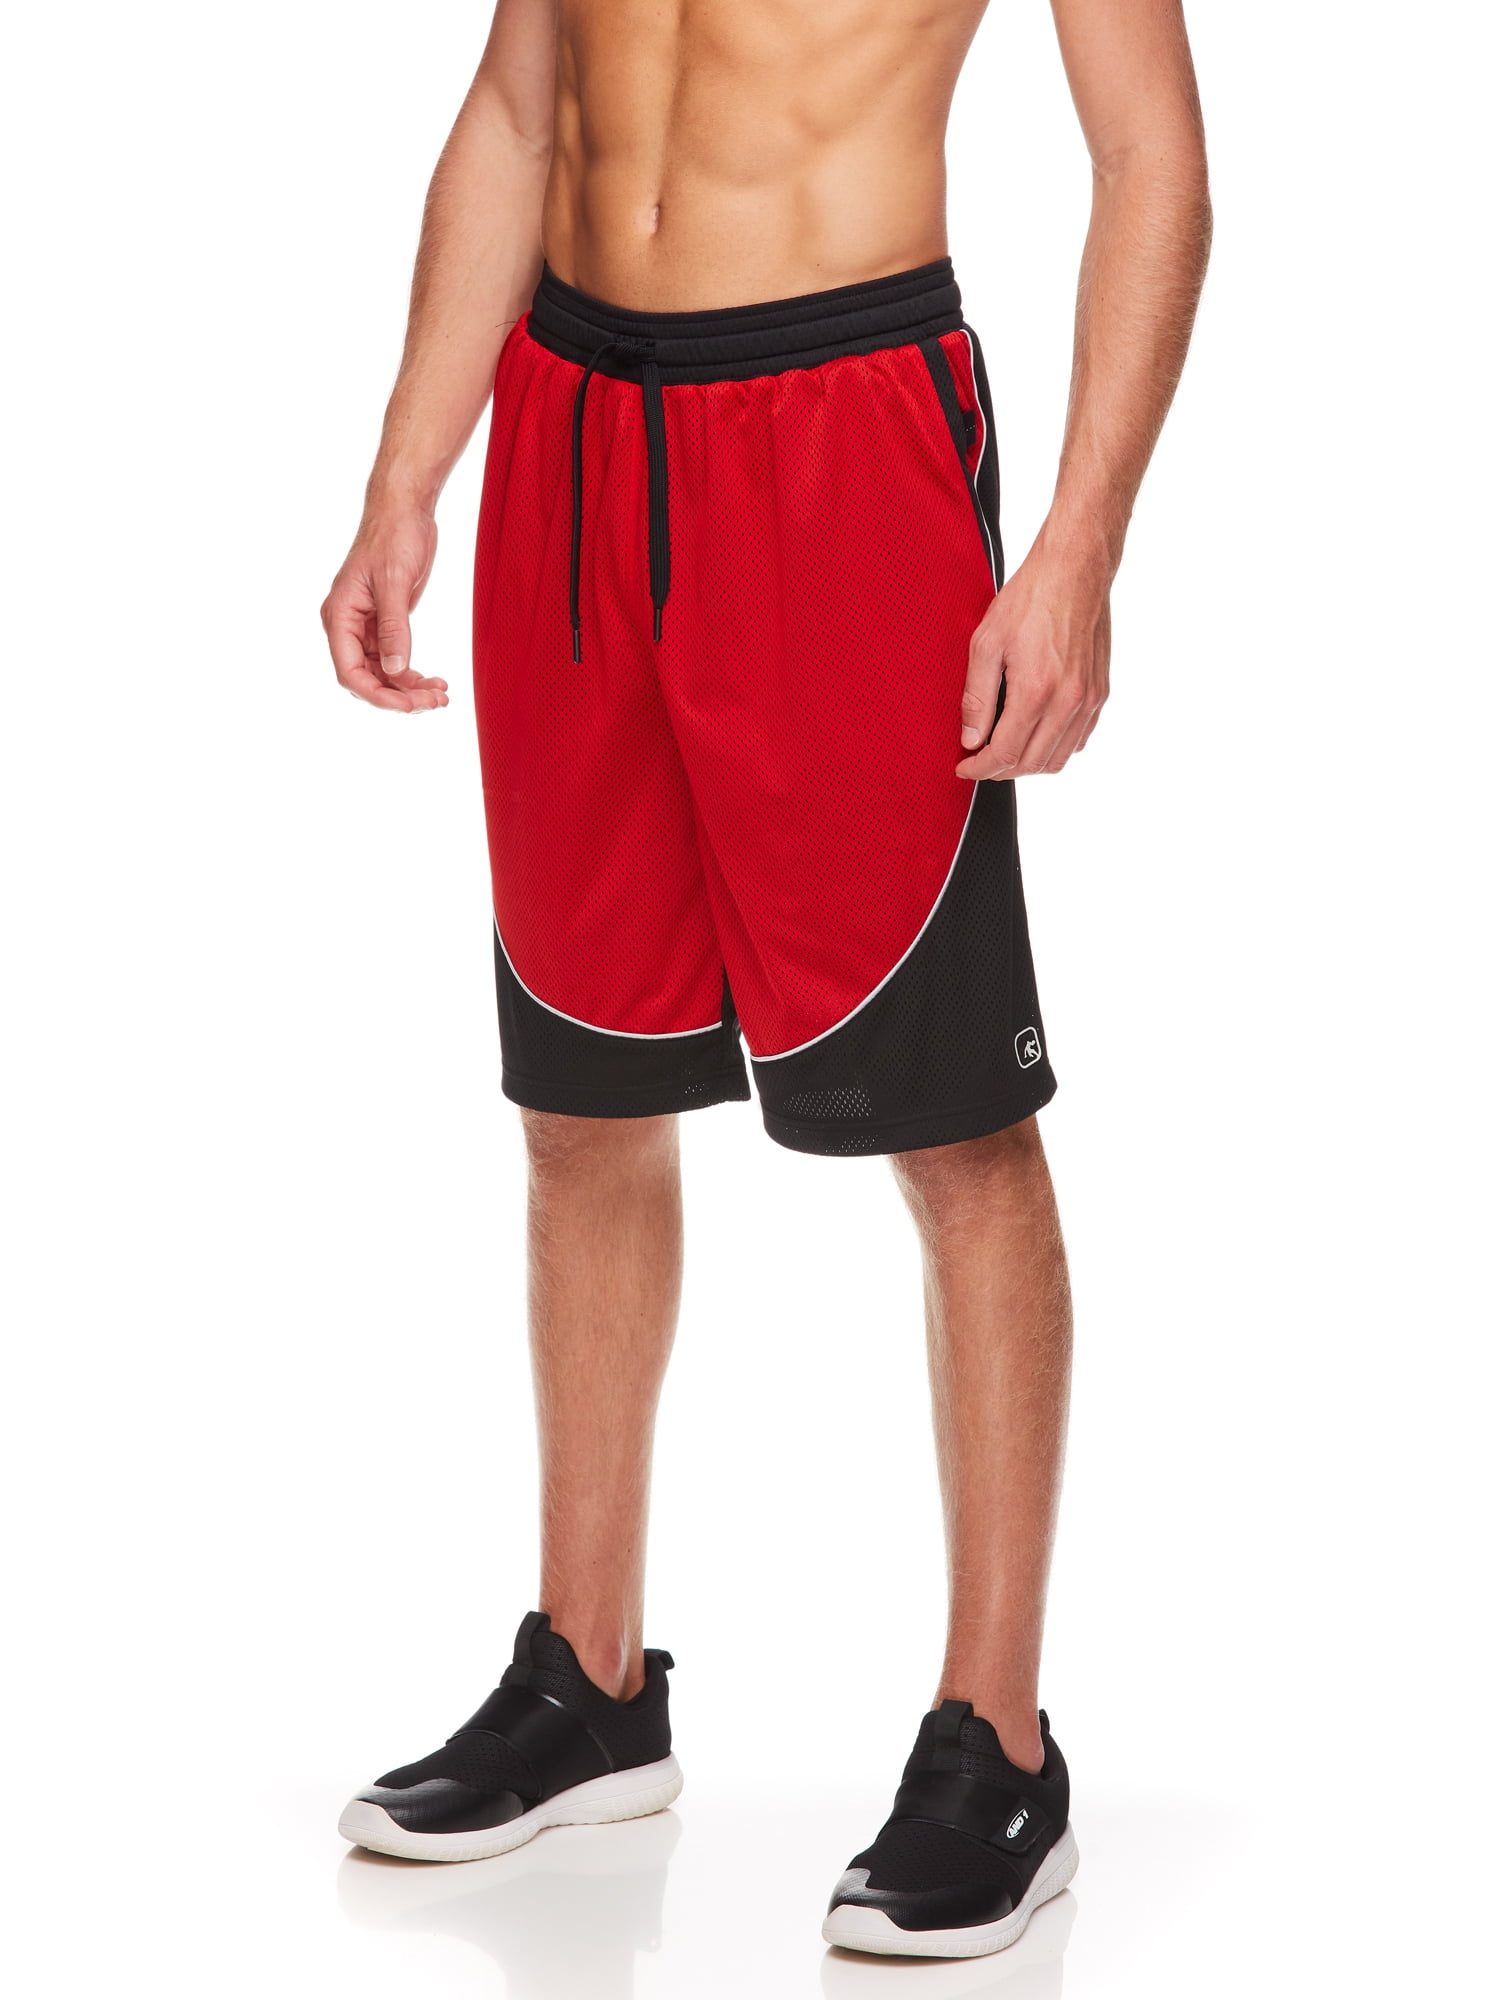 Red L/XL 9" And1 Compression Shooter Sleeve 11" Basketball 